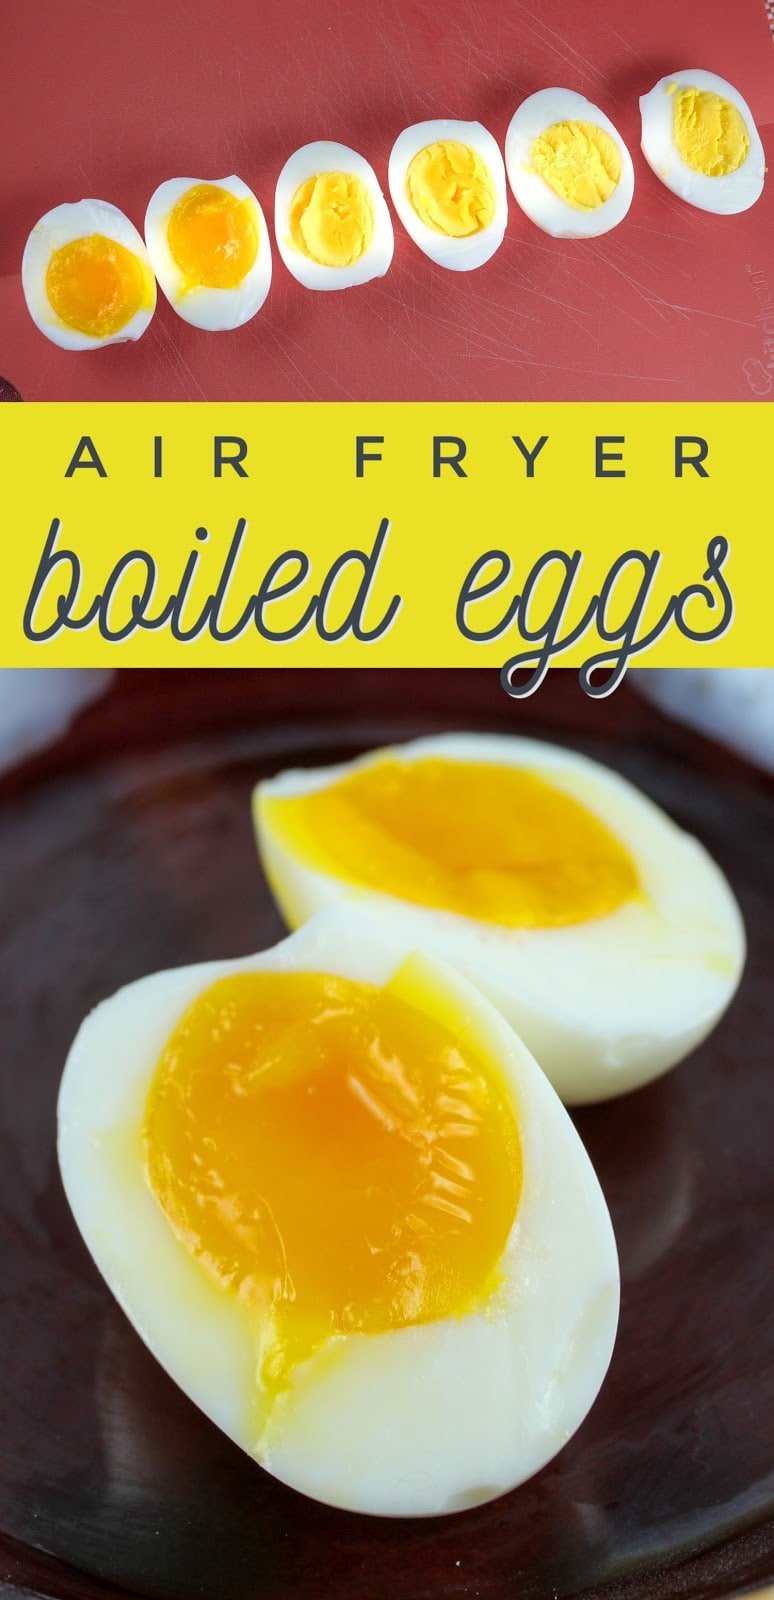 Whether you like your eggs soft-boiled, medium-boiled or hard-boiled – I have got you covered. After using your air fryer for boiled eggs – you’ll never boil water again!
 via @foodhussy